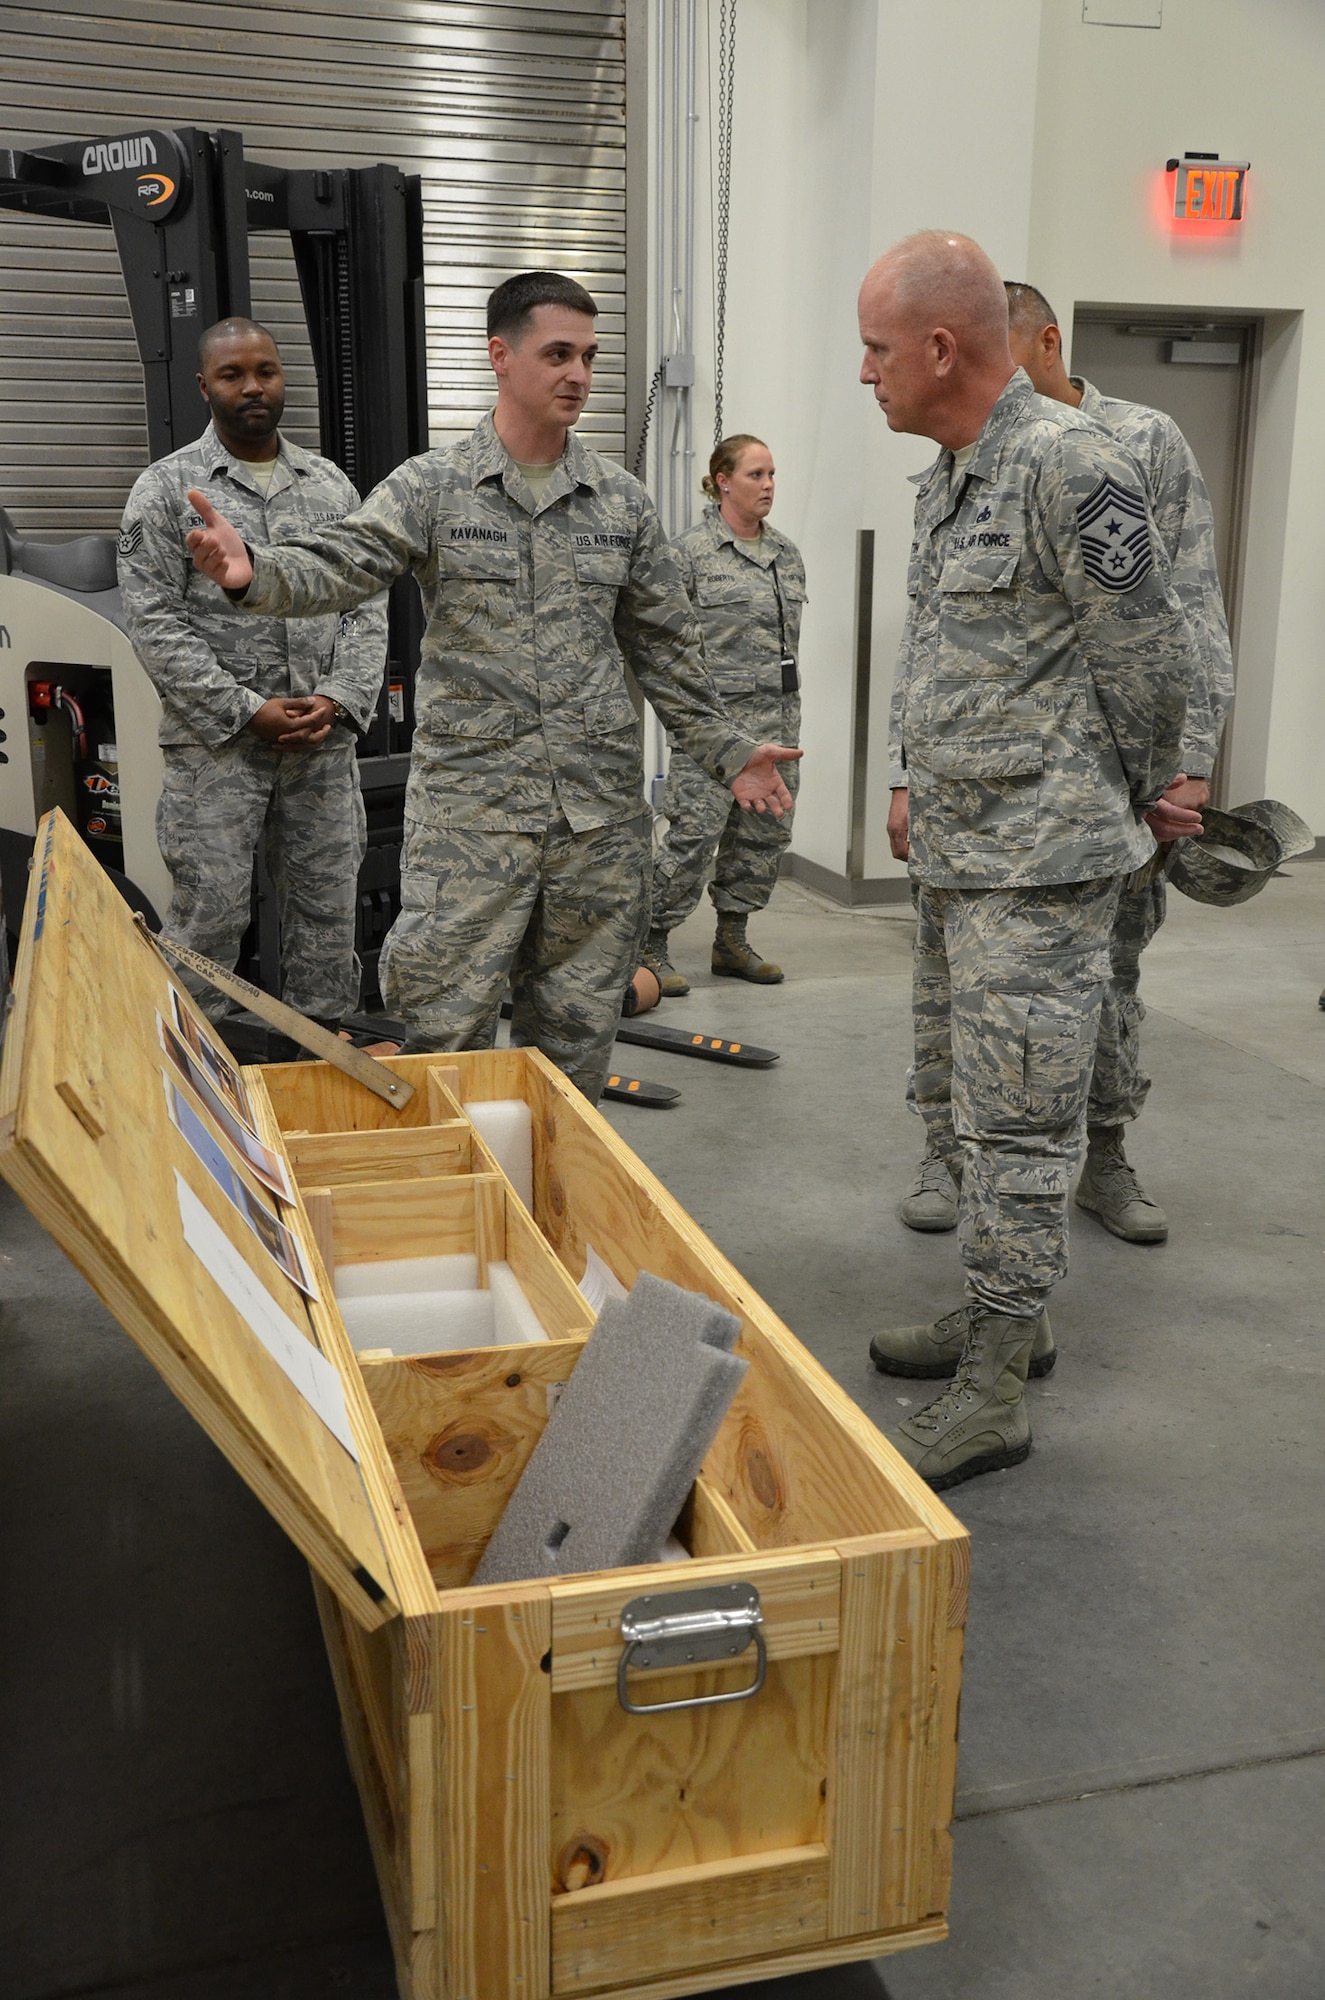 Tech. Sgt. Timothy Kavanagh, noncommissioned officer in charge of product support for the Air Force Technical Applications Center, Patrick AFB, Fla., explains to Chief Master Sgt. Frank Batten, command chief of Air Combat Command, how he designed a crate to better ship, house and store AFTAC's precision seismic equipment.  Batten visited the nuclear treaty monitoring center Jan. 24, 2018 to meet with the Airmen who perform AFTAC's 24/7 global mission. (U.S. Air Force photo by Susan A. Romano)